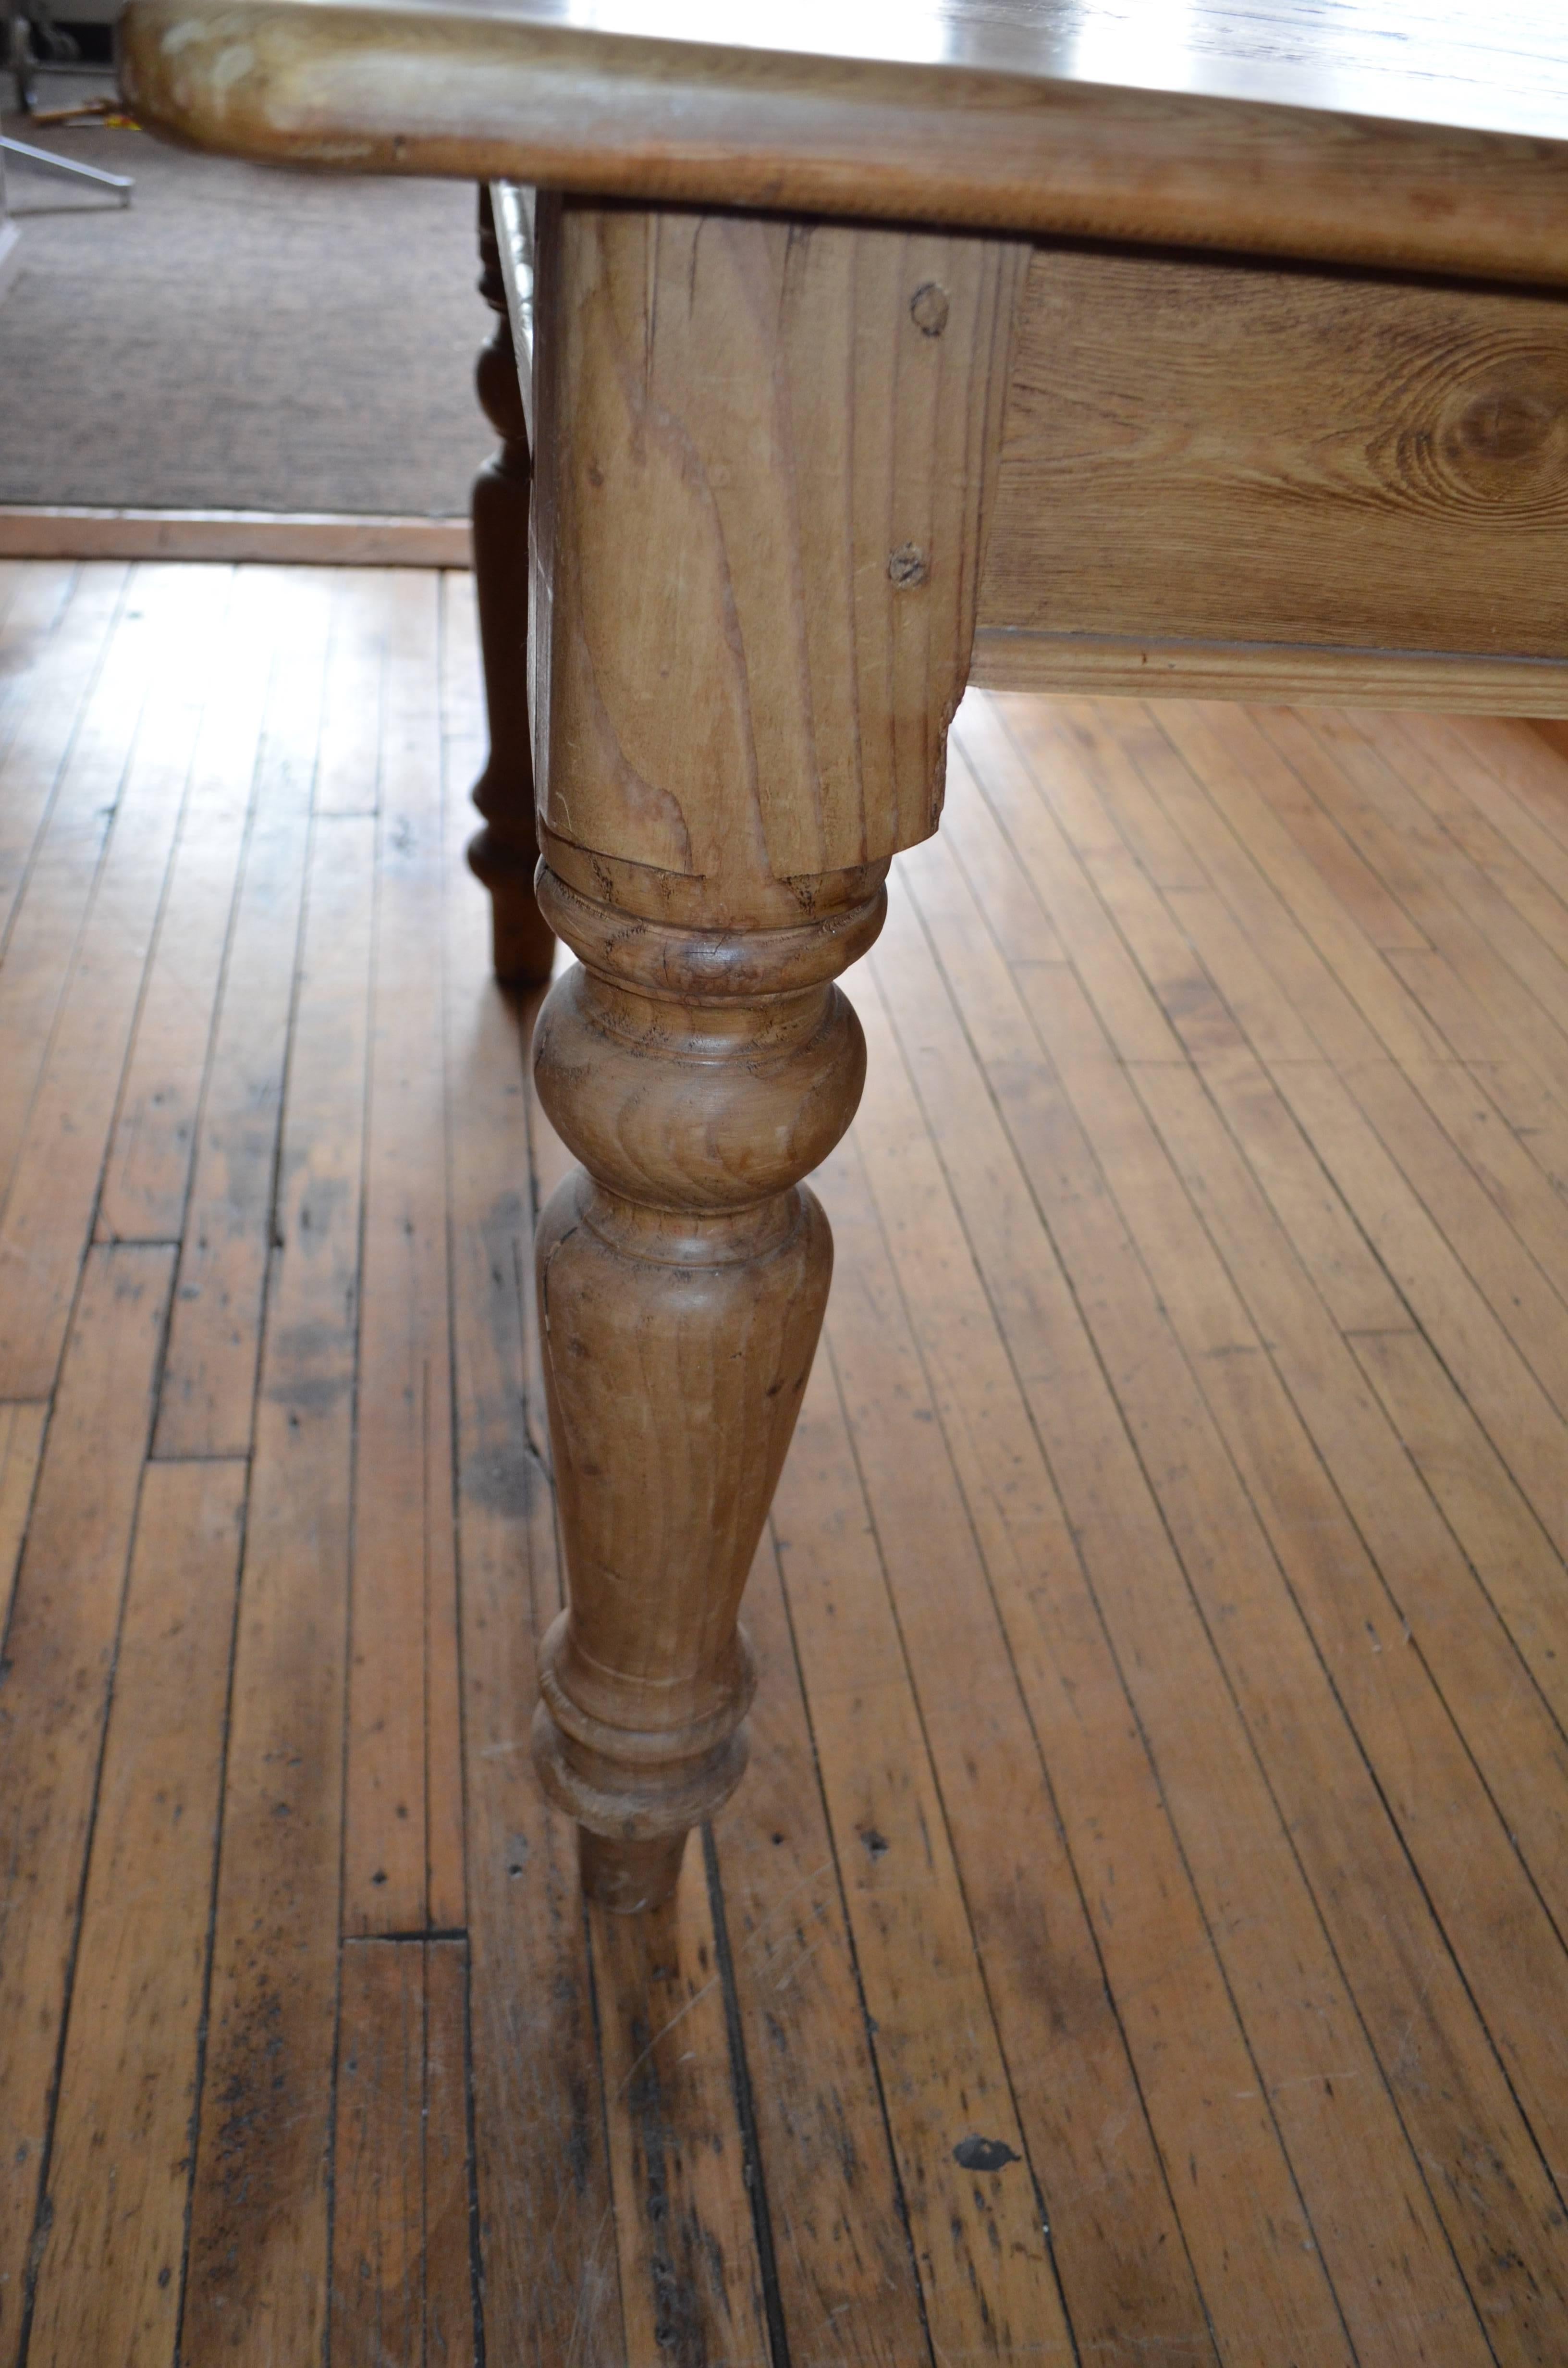 Late 19th Century Farm Table from Pine with Balustrade Legs 1